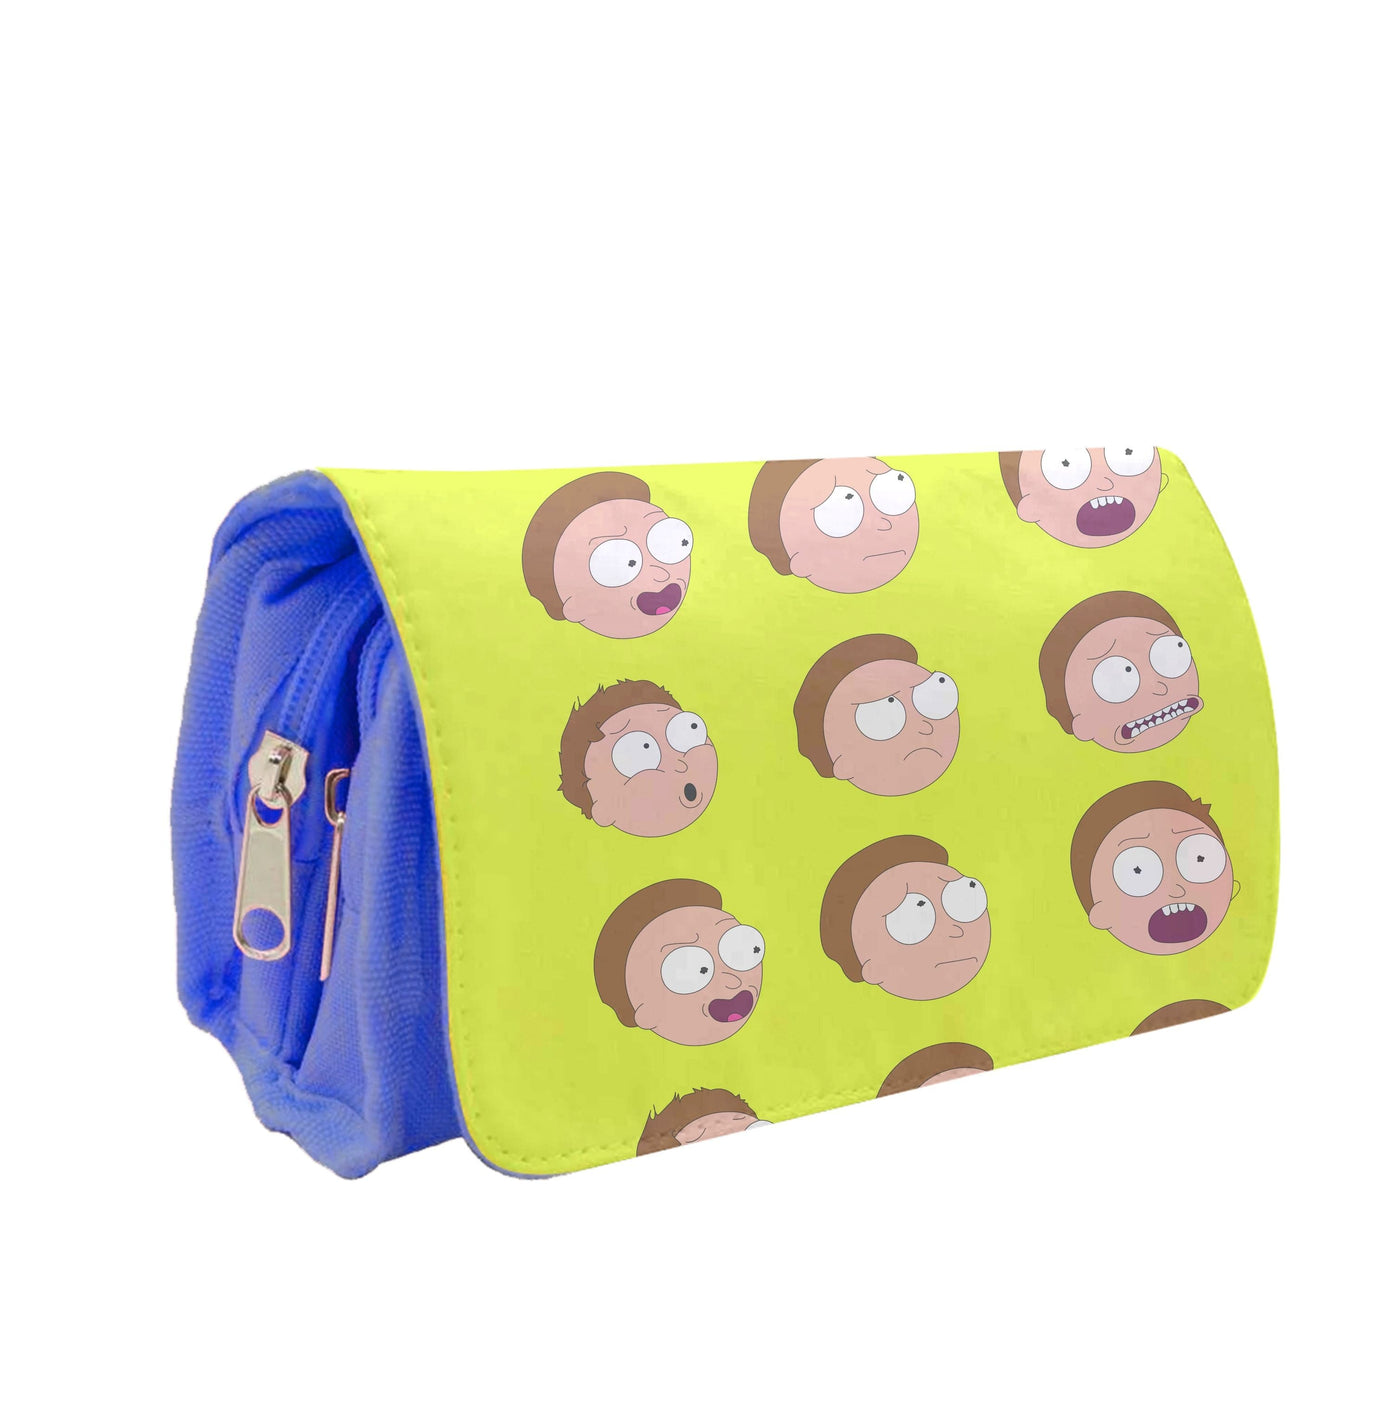 Morty Pattern - Rick And Morty Pencil Case